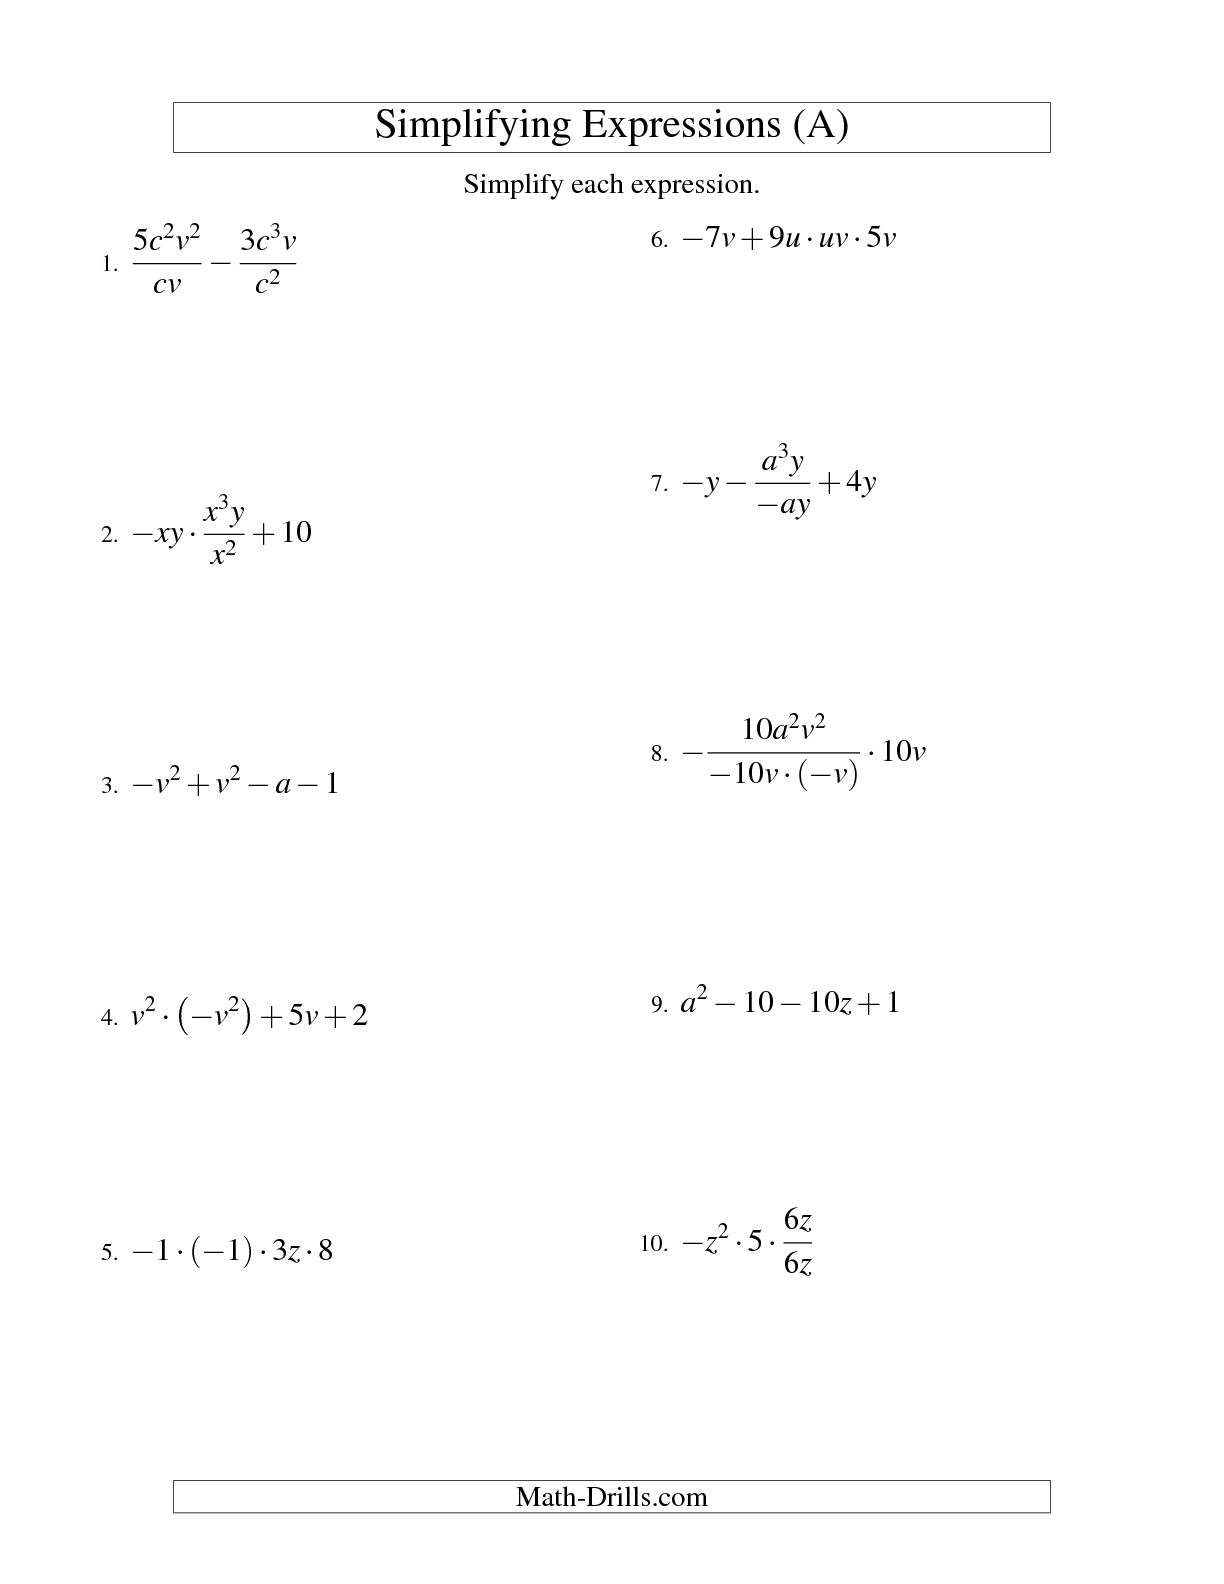 13-best-images-of-8th-grade-math-exponents-worksheets-6-th-grade-8th